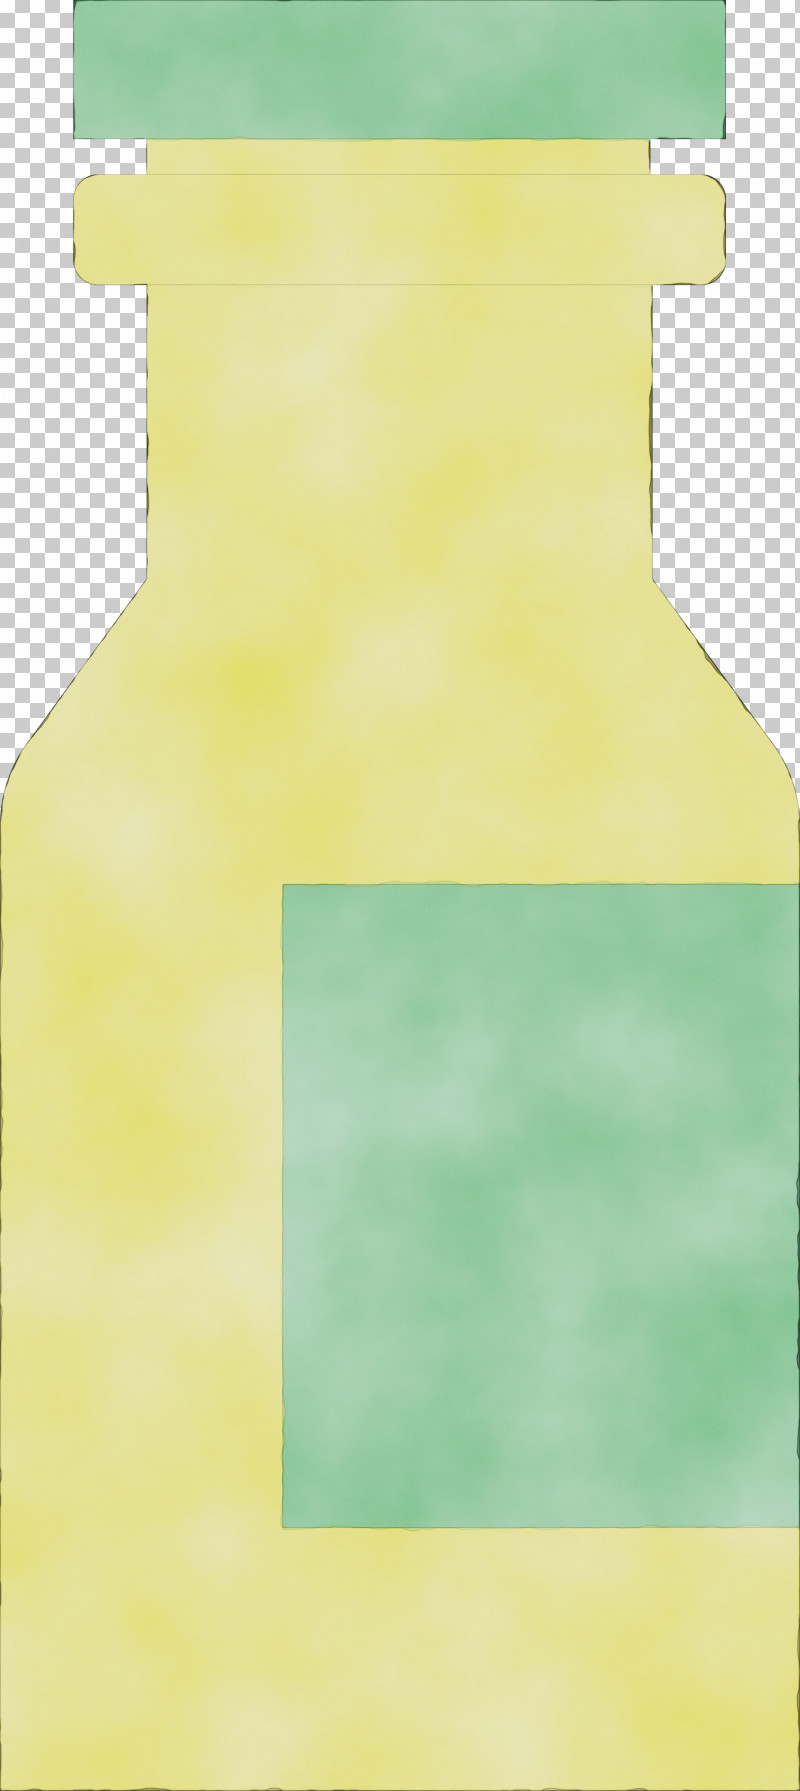 Glass Bottle Yellow Rectangle Glass Bottle PNG, Clipart, Bottle, Glass, Glass Bottle, Paint, Rectangle Free PNG Download